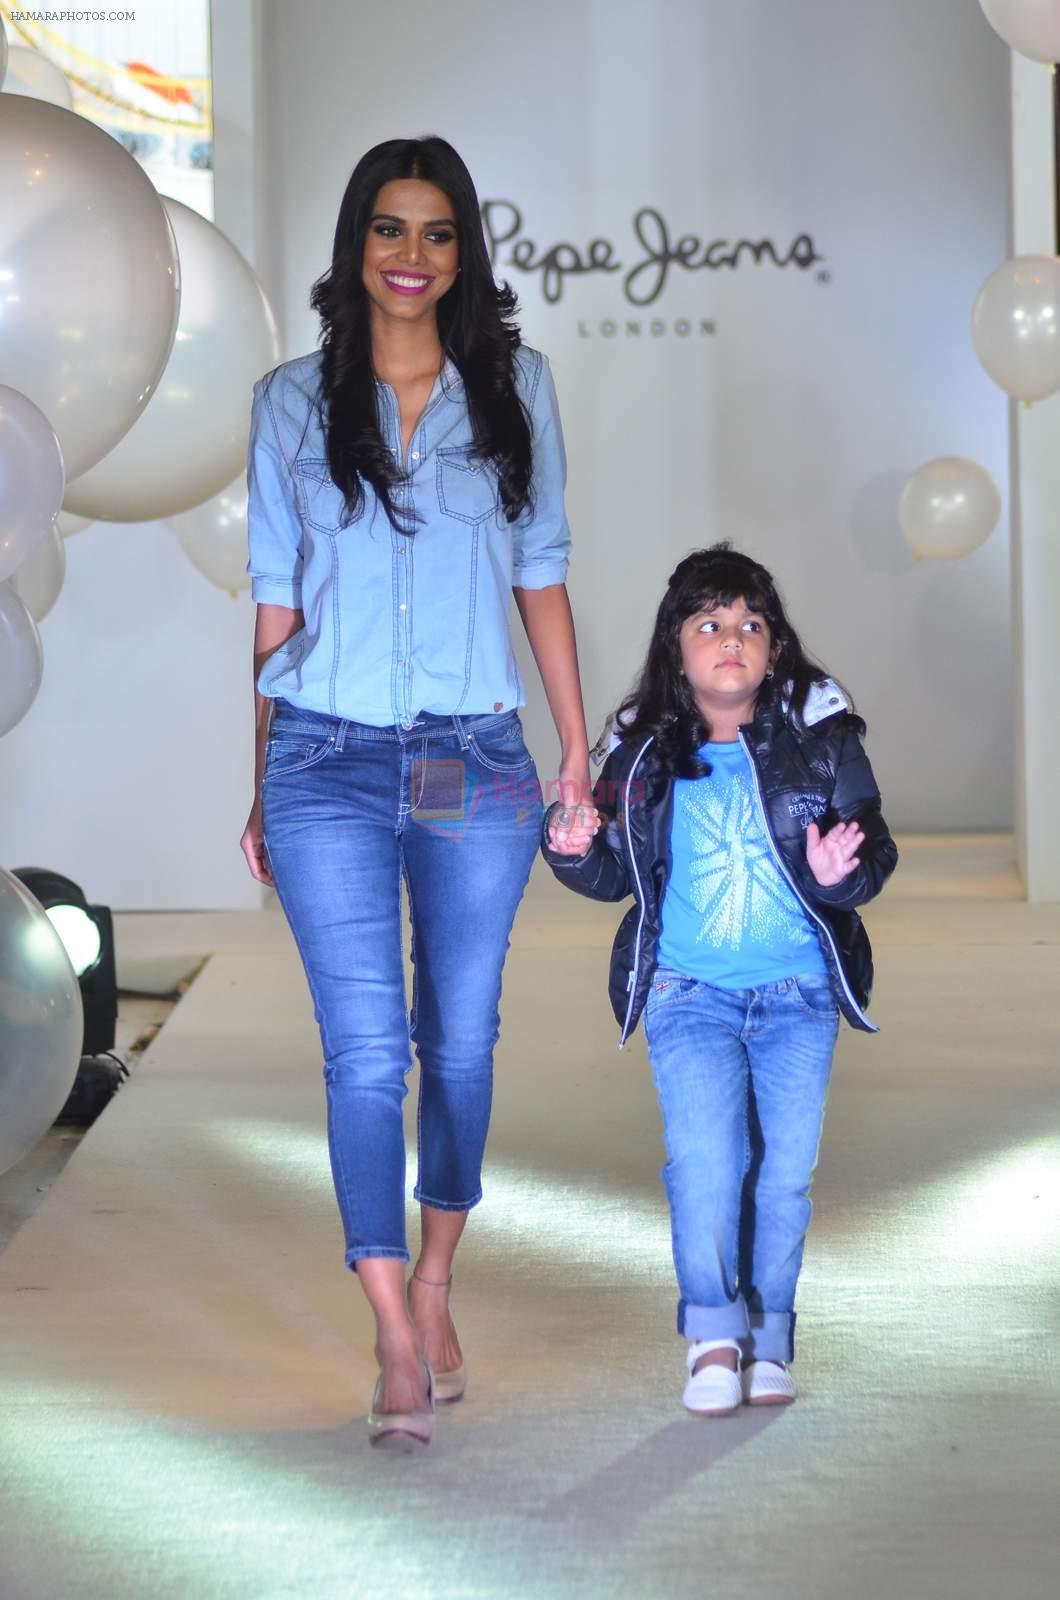 at Pepe Jeans kids wear launch in Mumbai on 10th Sept 2015